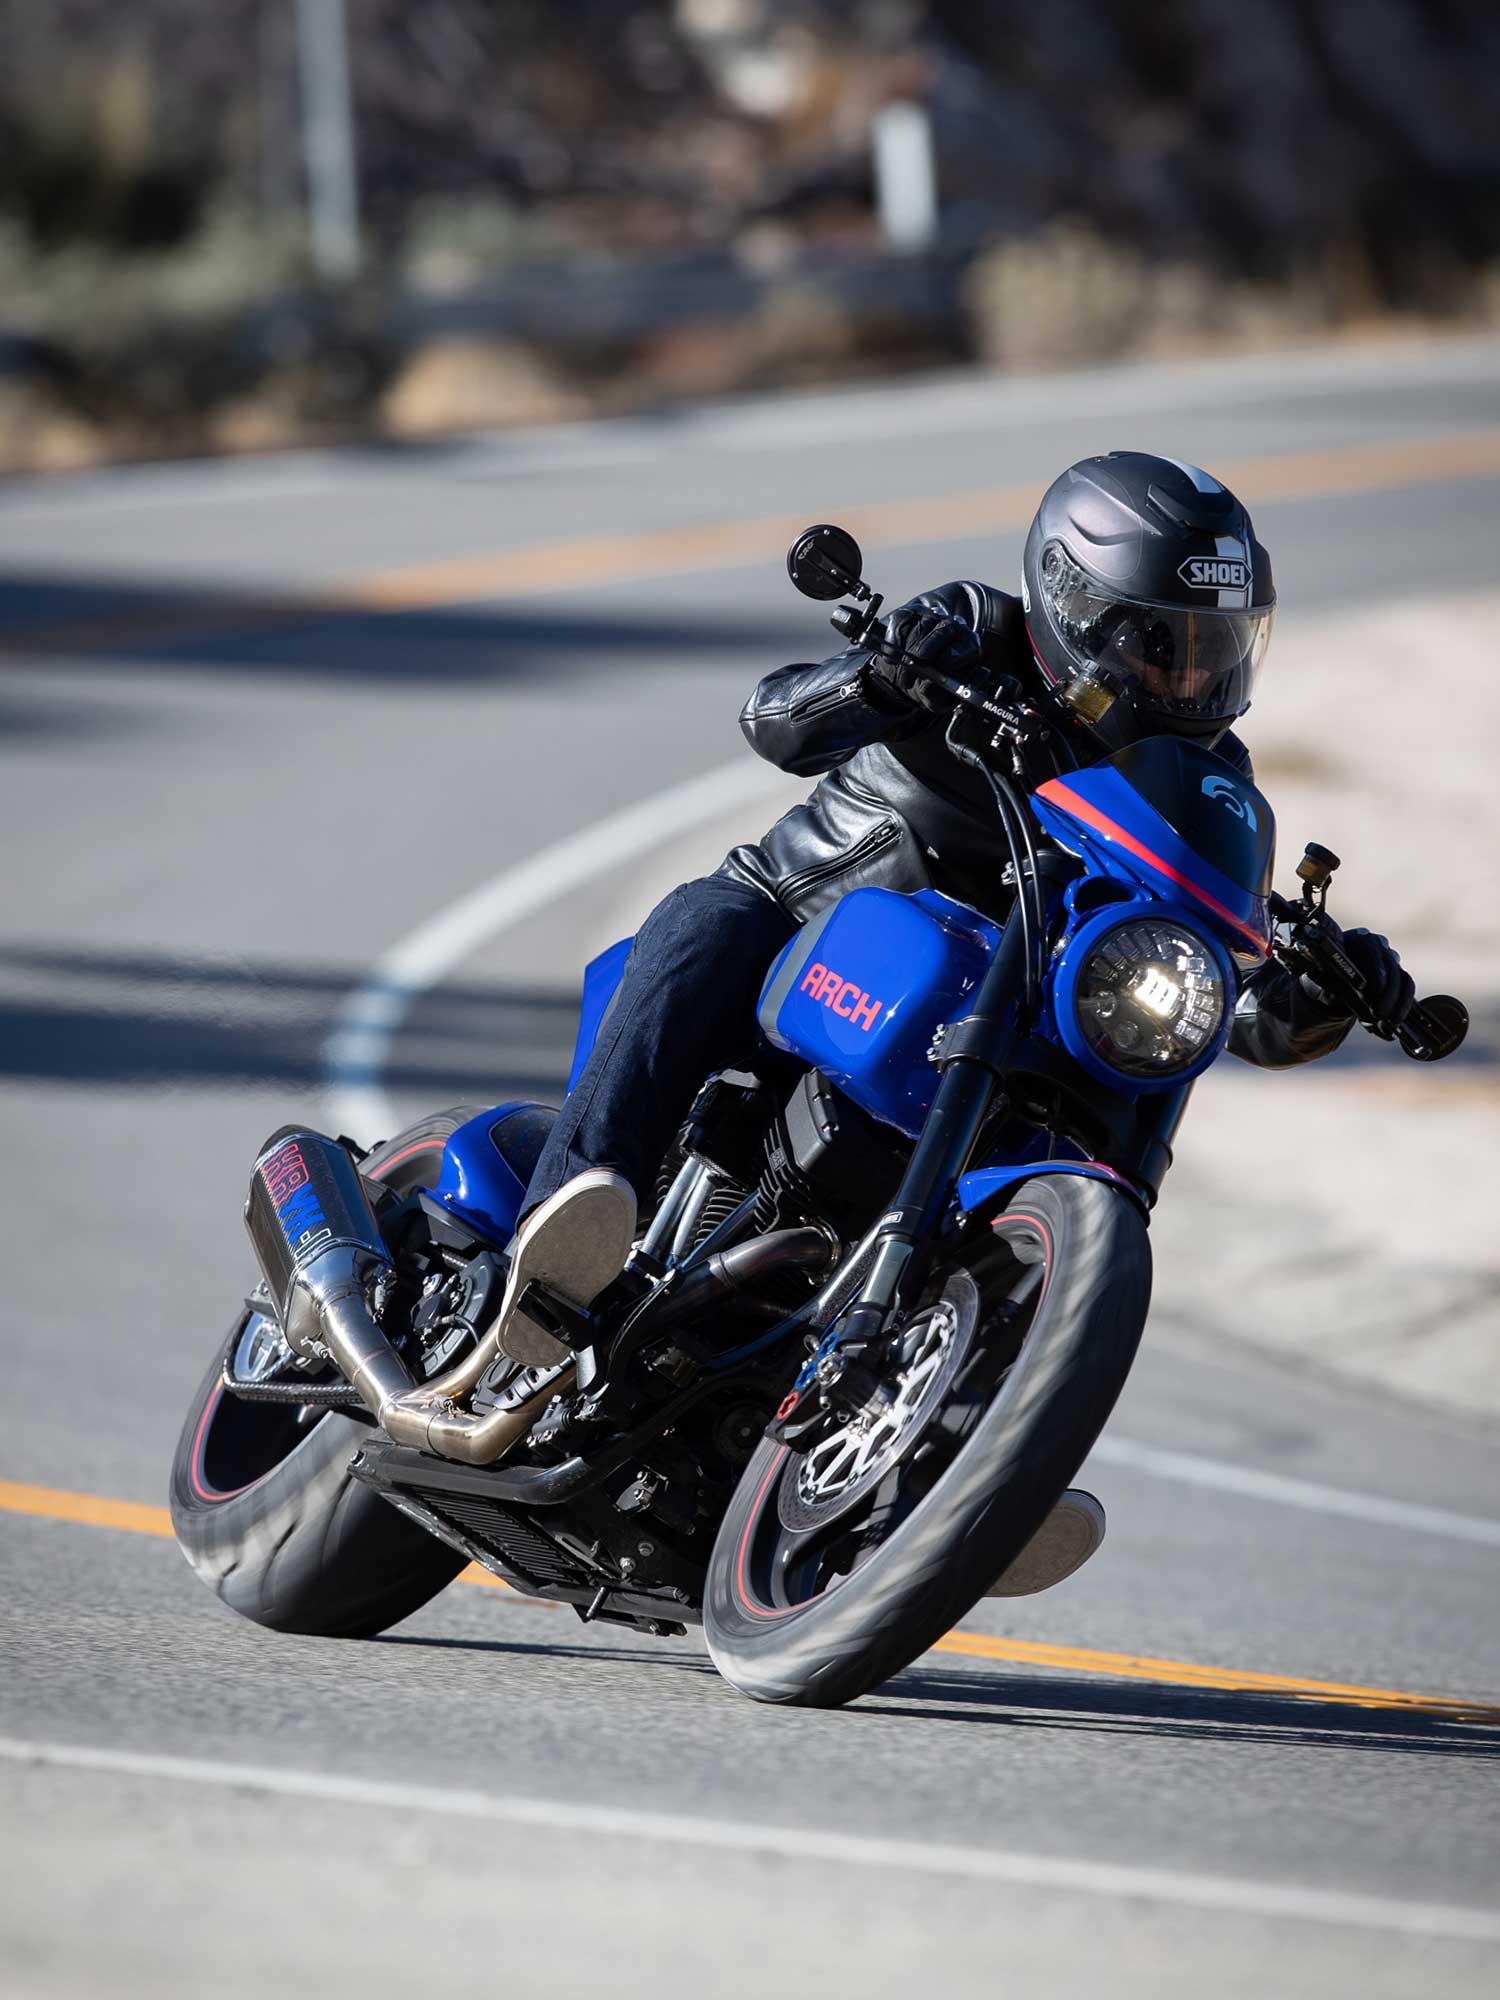 Despite the 240/40 rear tire, the KRGT-1 is happy to get into the twisties, and there’s plenty of positive feel from the 19-inch front wheel.